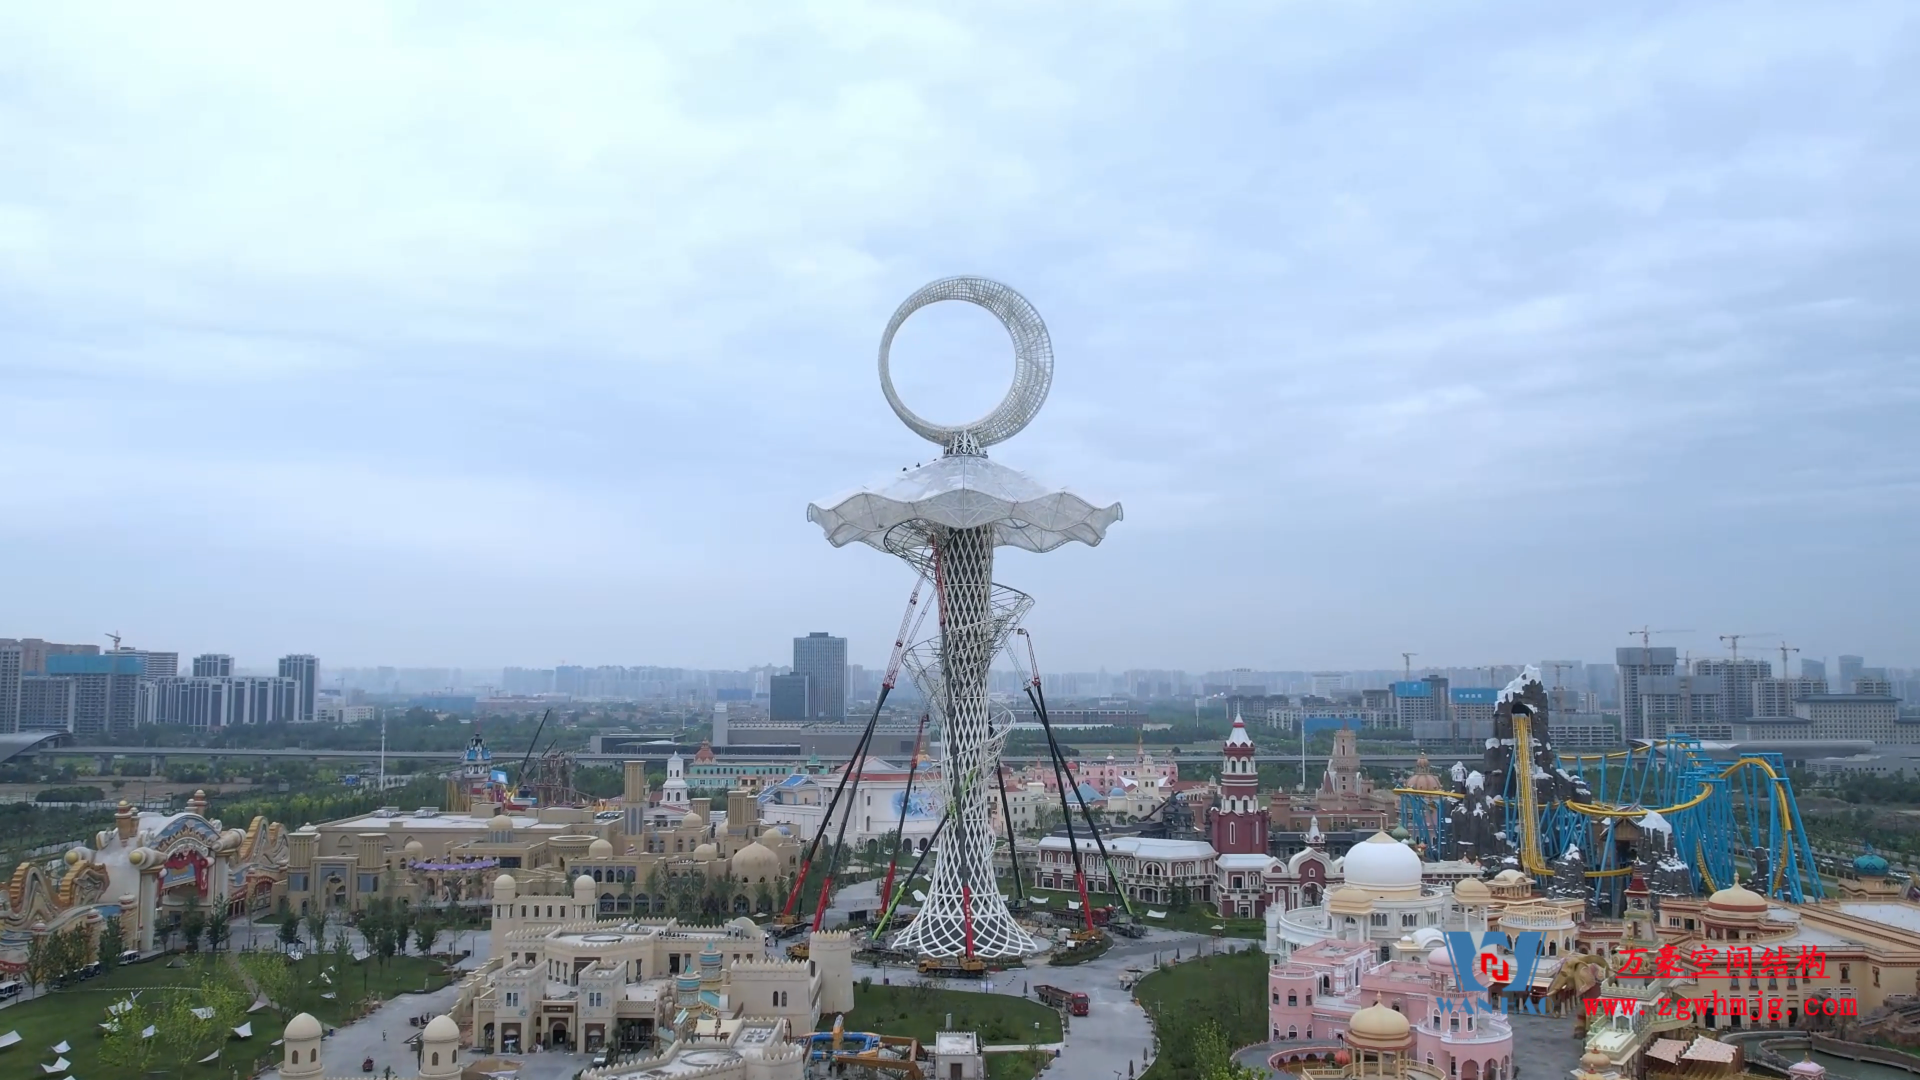 Xi 'an Silk Road Tower ETFE membrane structure project video